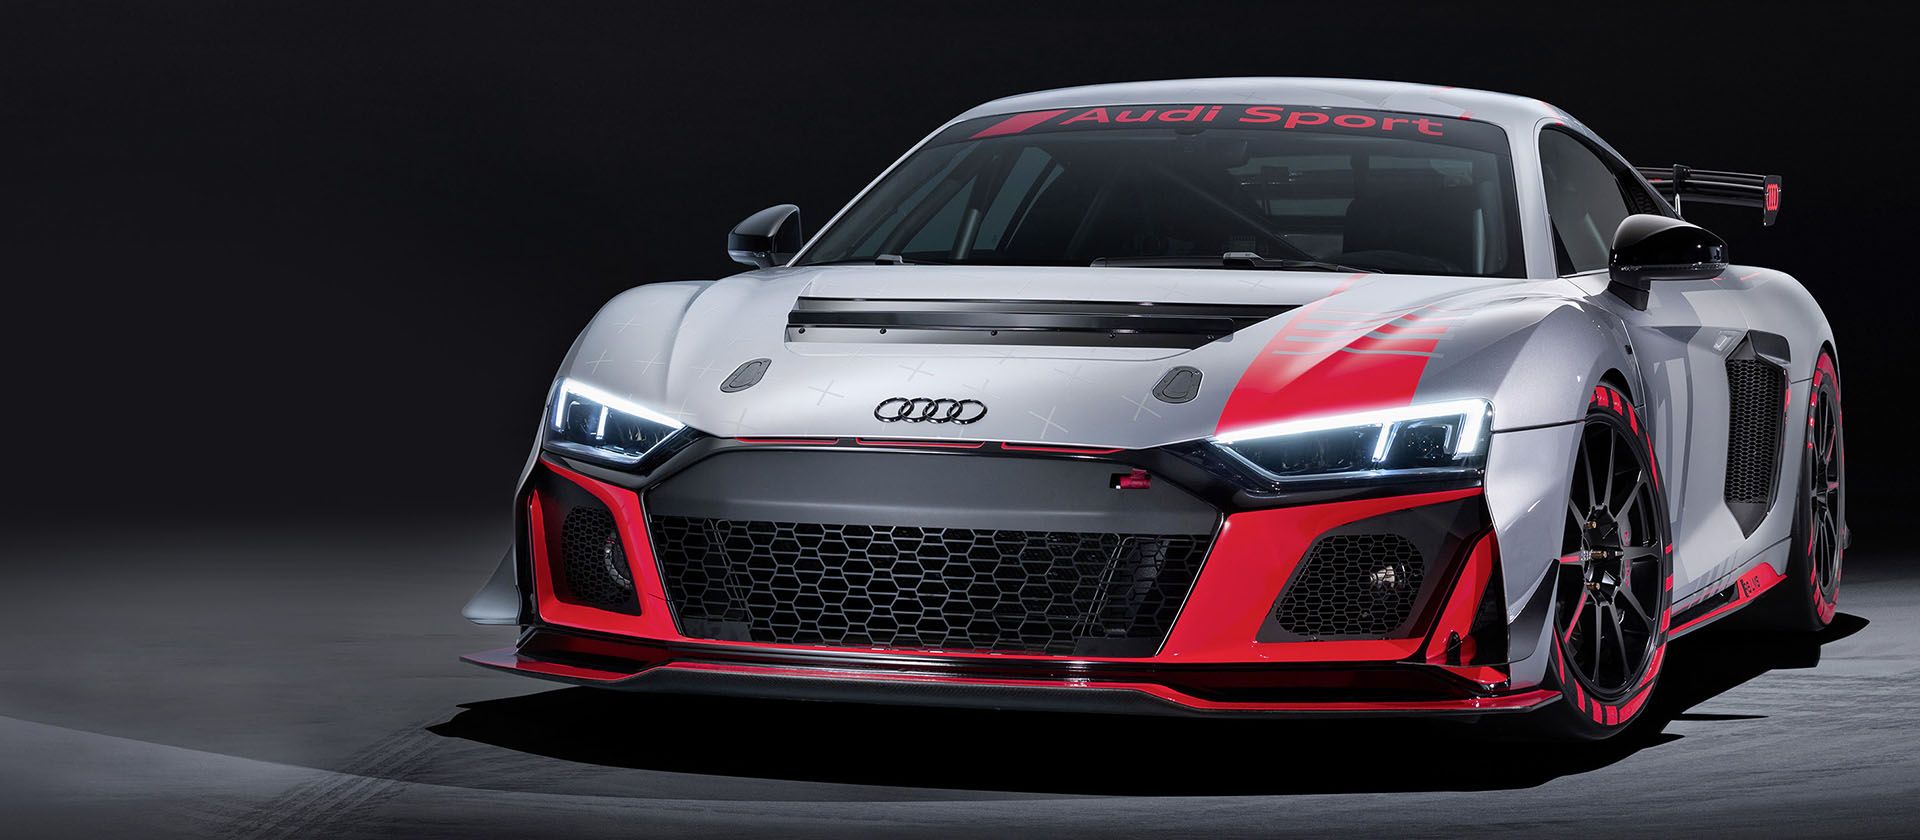 Audi Sport aims to double sales by 2023